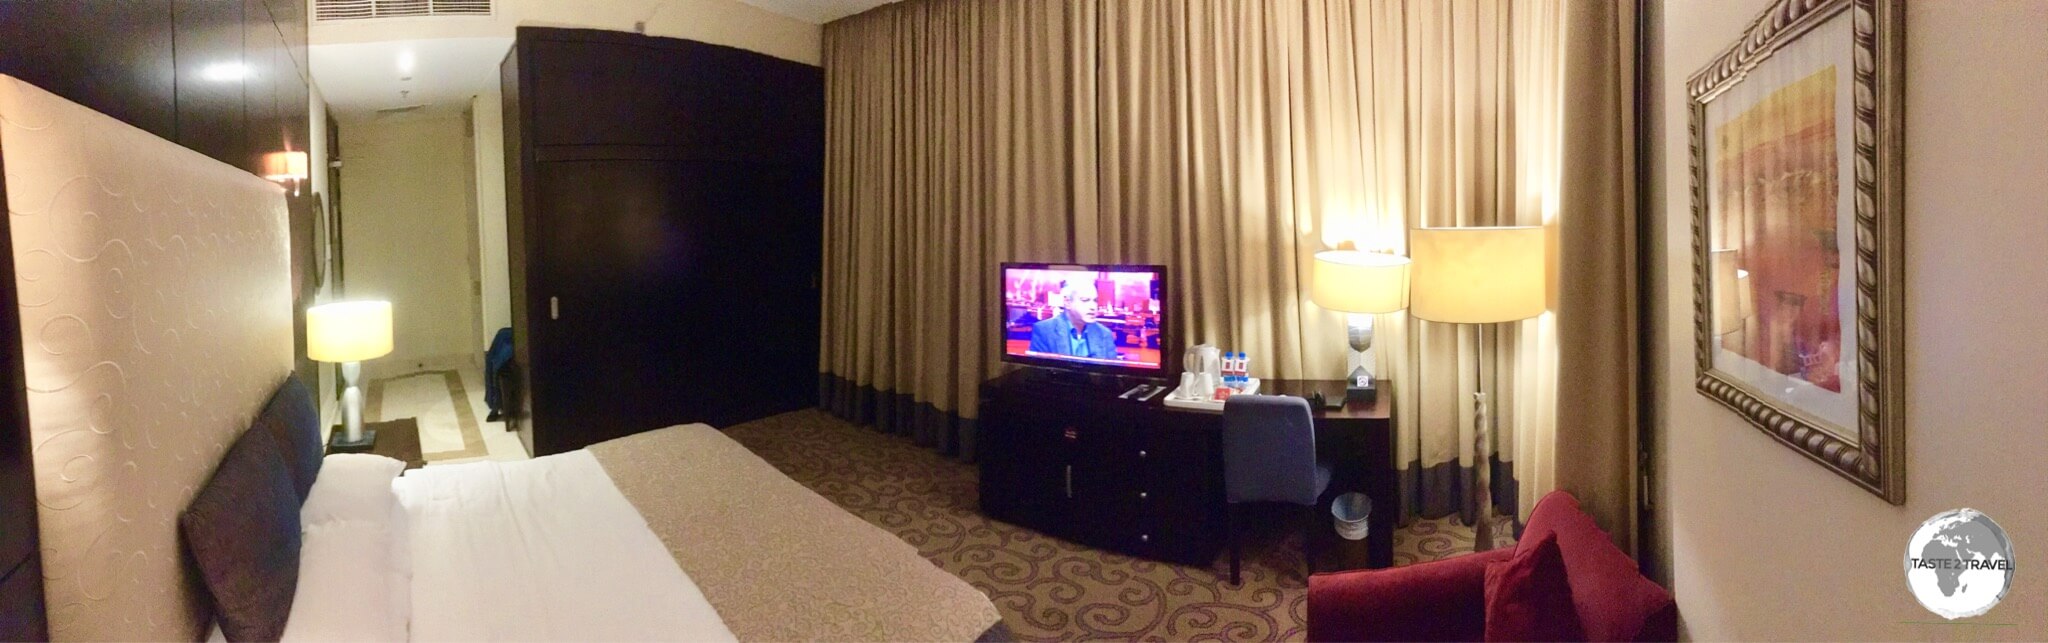 My room at the Century Hotel in Doha. 